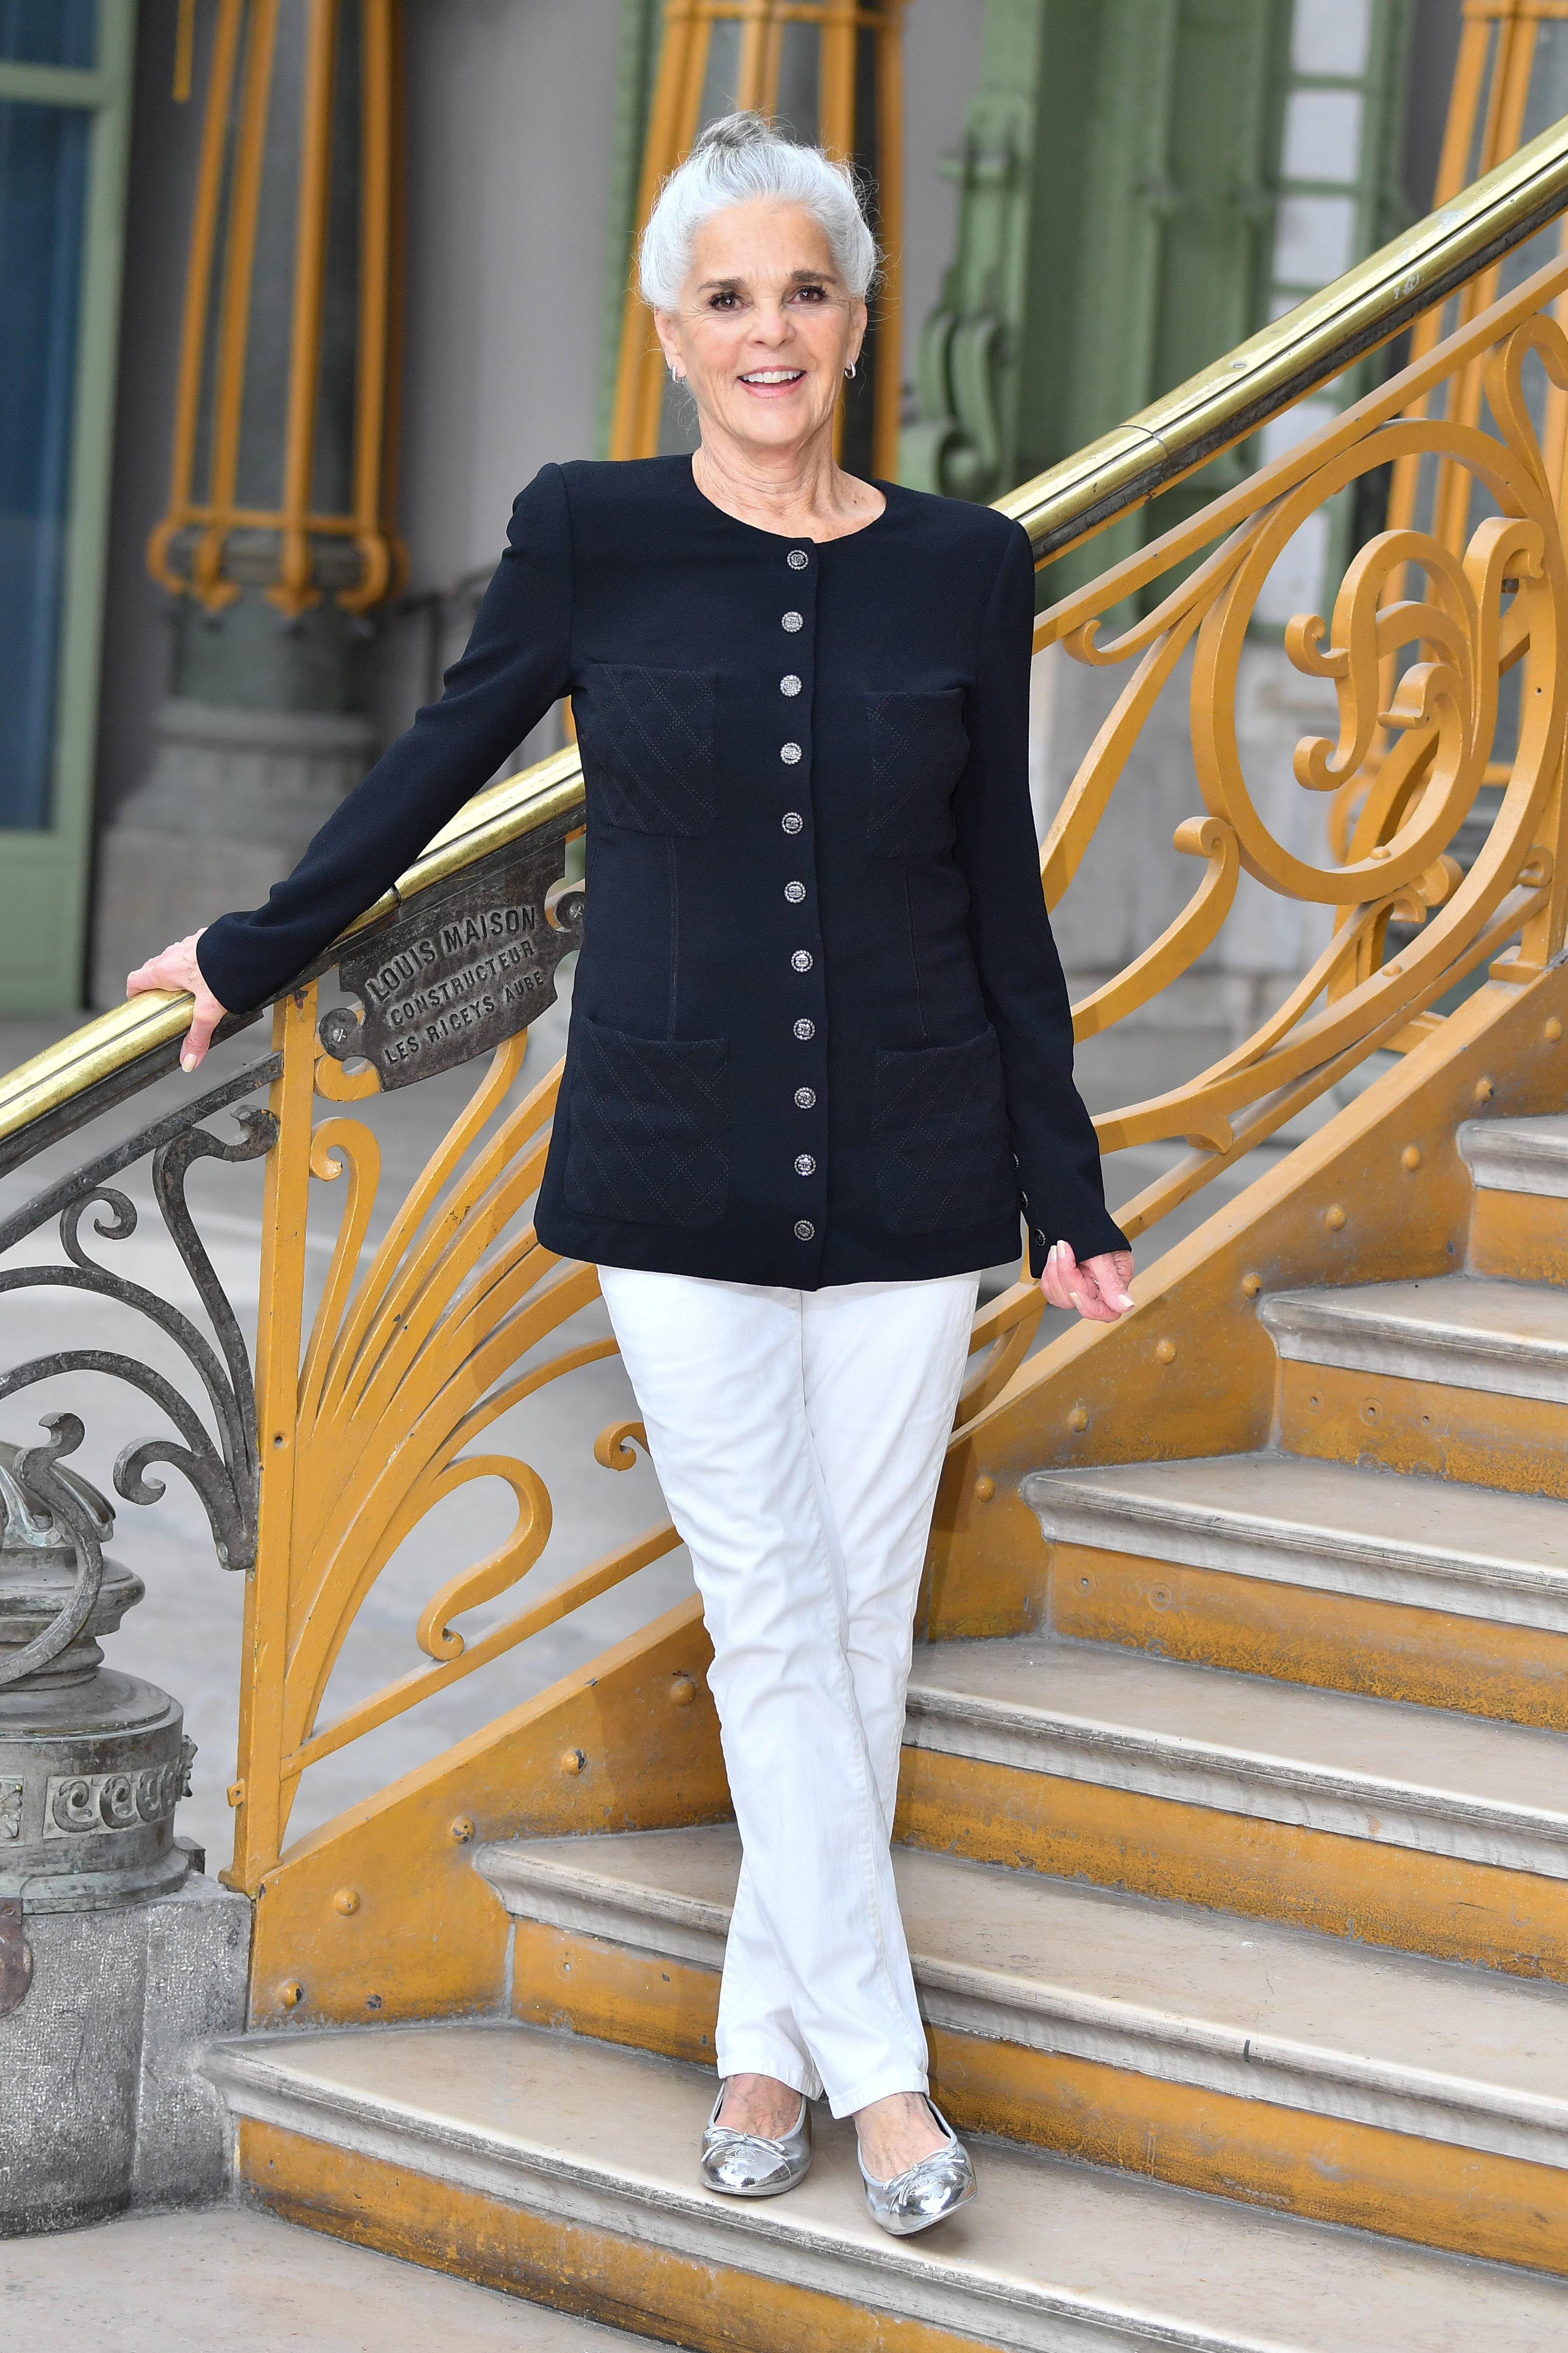 Ali MacGraw at the Chanel Cruise Collection 2020 Photocall on May 3, 2019, in Paris, France | Source: Getty Images